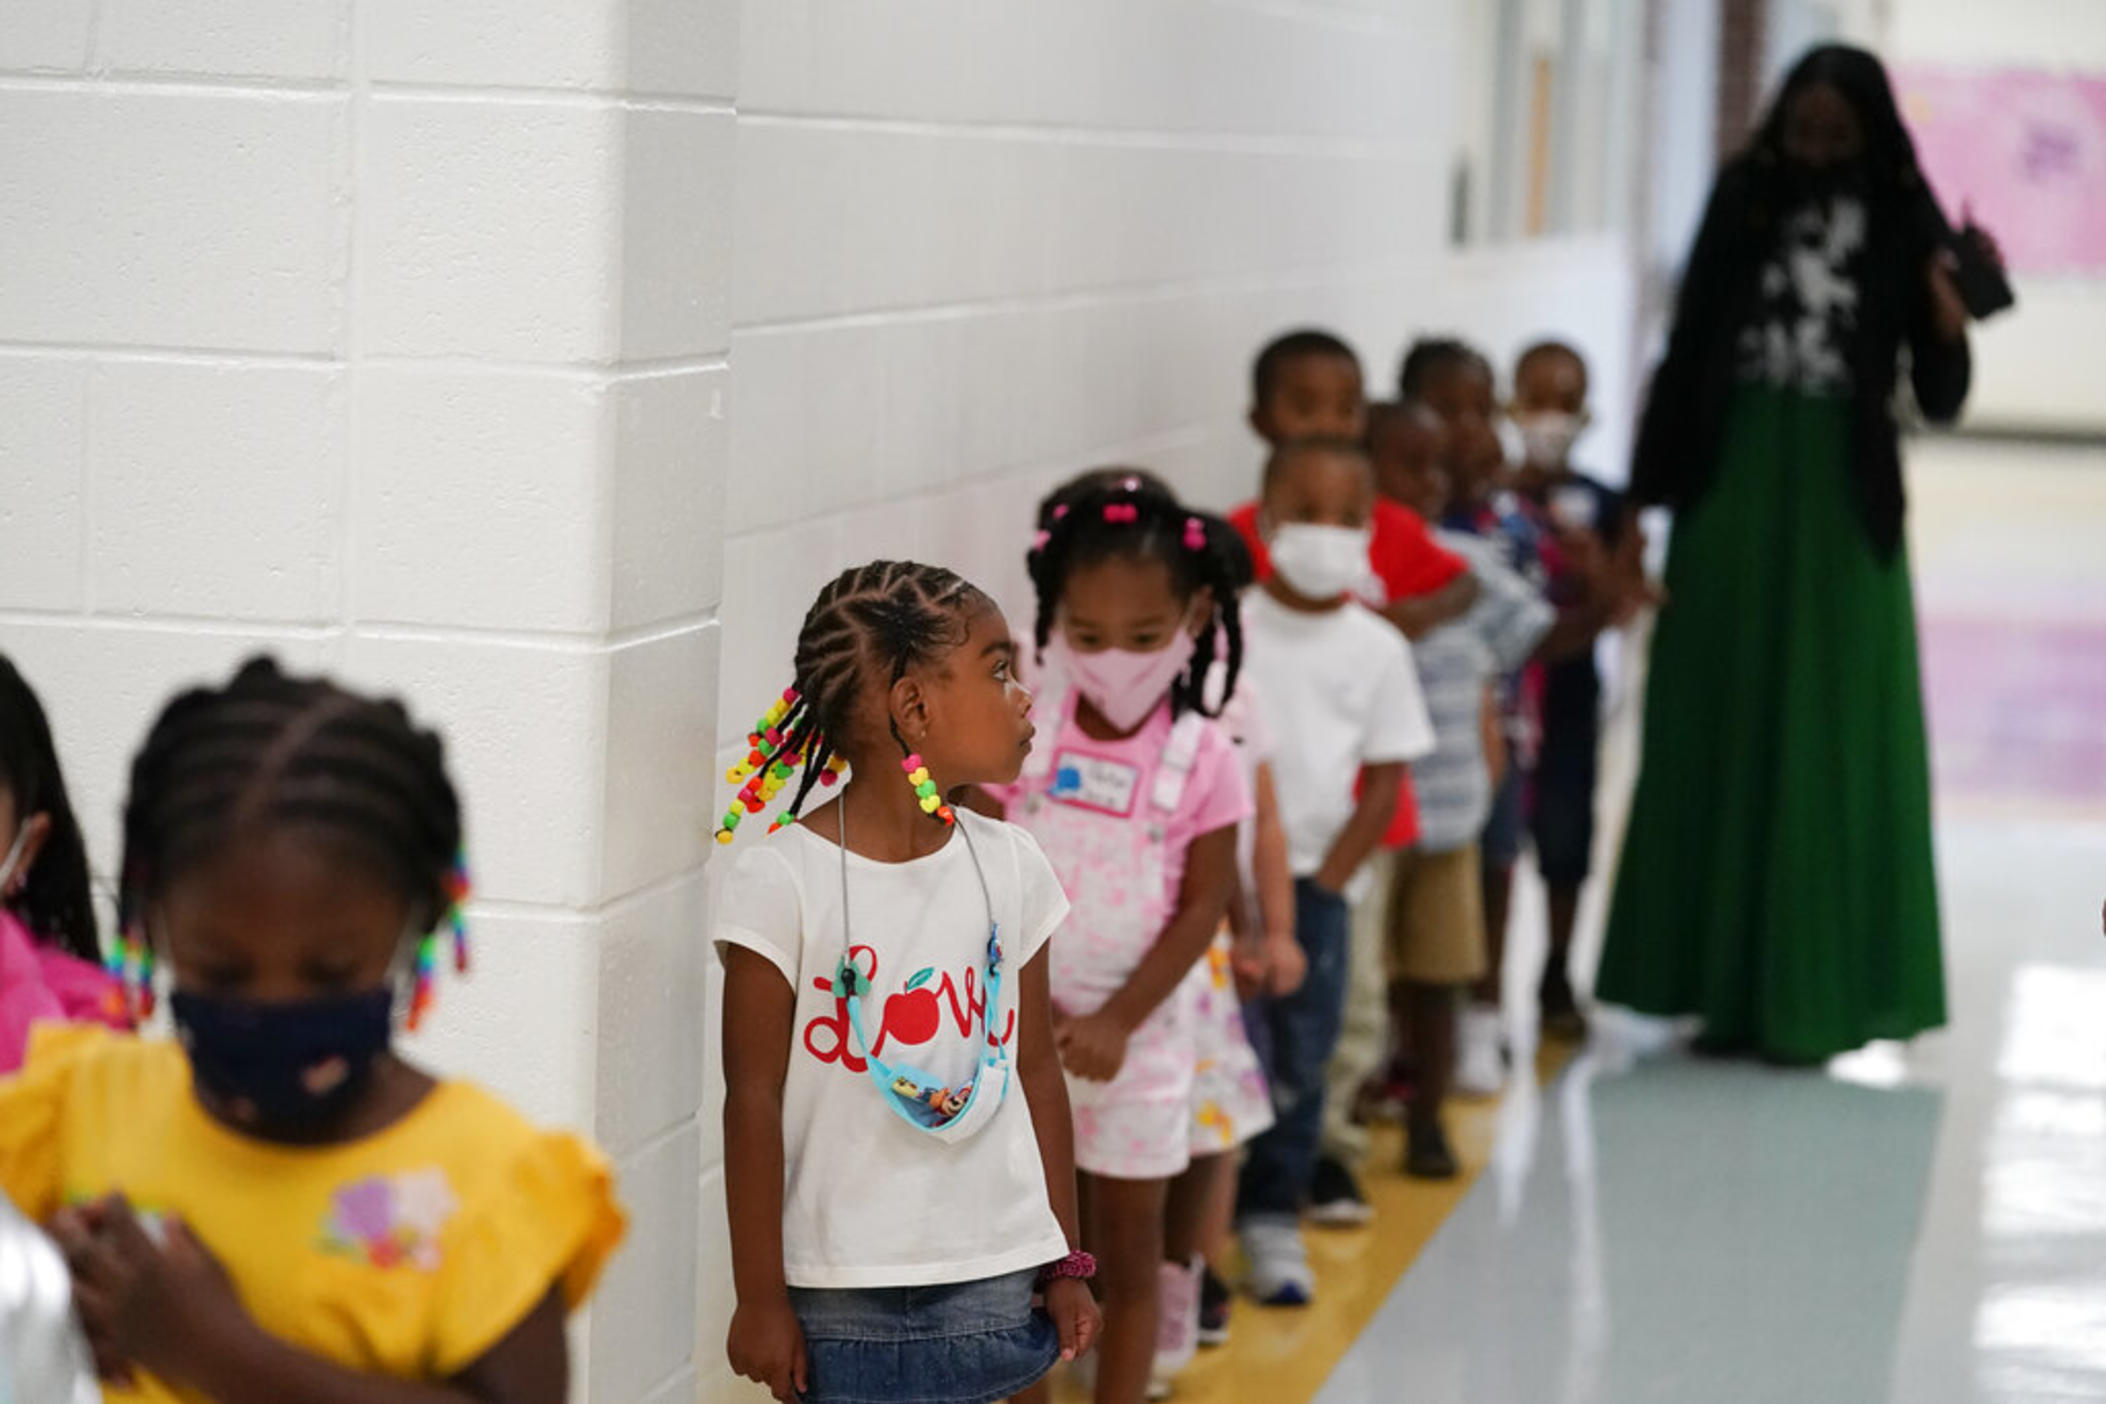 Students walk down the hallway at Tussahaw Elementary school on Wednesday, Aug. 4, 2021, in McDonough, Ga., with some in masks and some unmasked. Gov. Brian Kemp on Wednesday, Feb. 9, 2022, said he would propose a law that would let parents opt their students out of masks in Georgia school districts that require them for all students to prevent the spread of COVID-19.